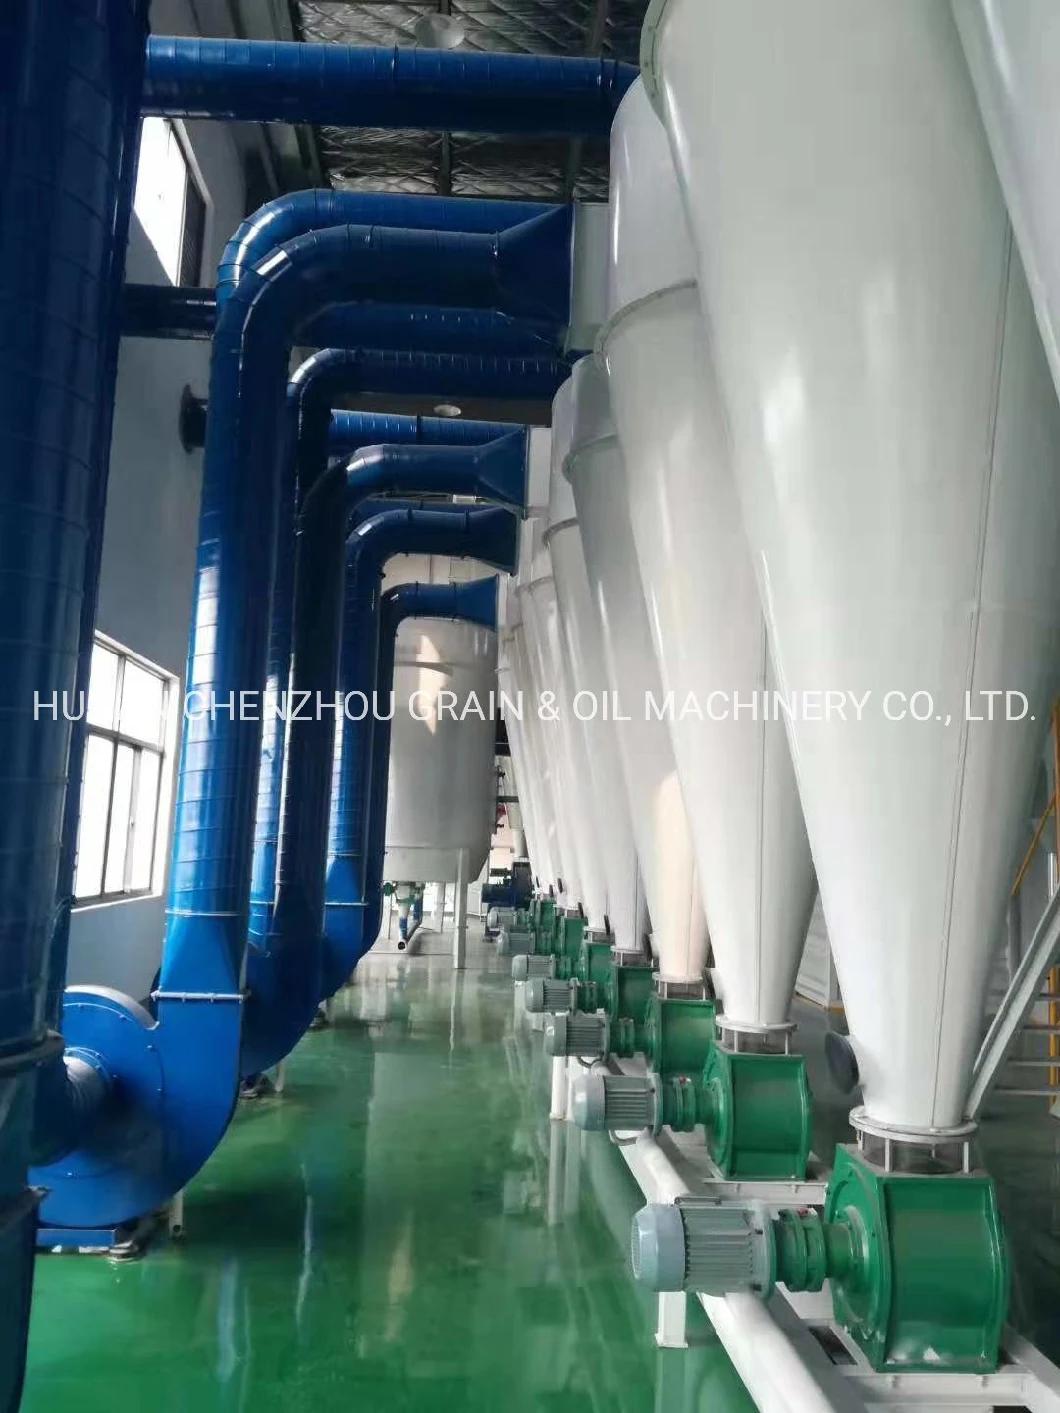 1000tons Final Rice Silos for Rice Mill Rcie Paddy Brown Rice Storage